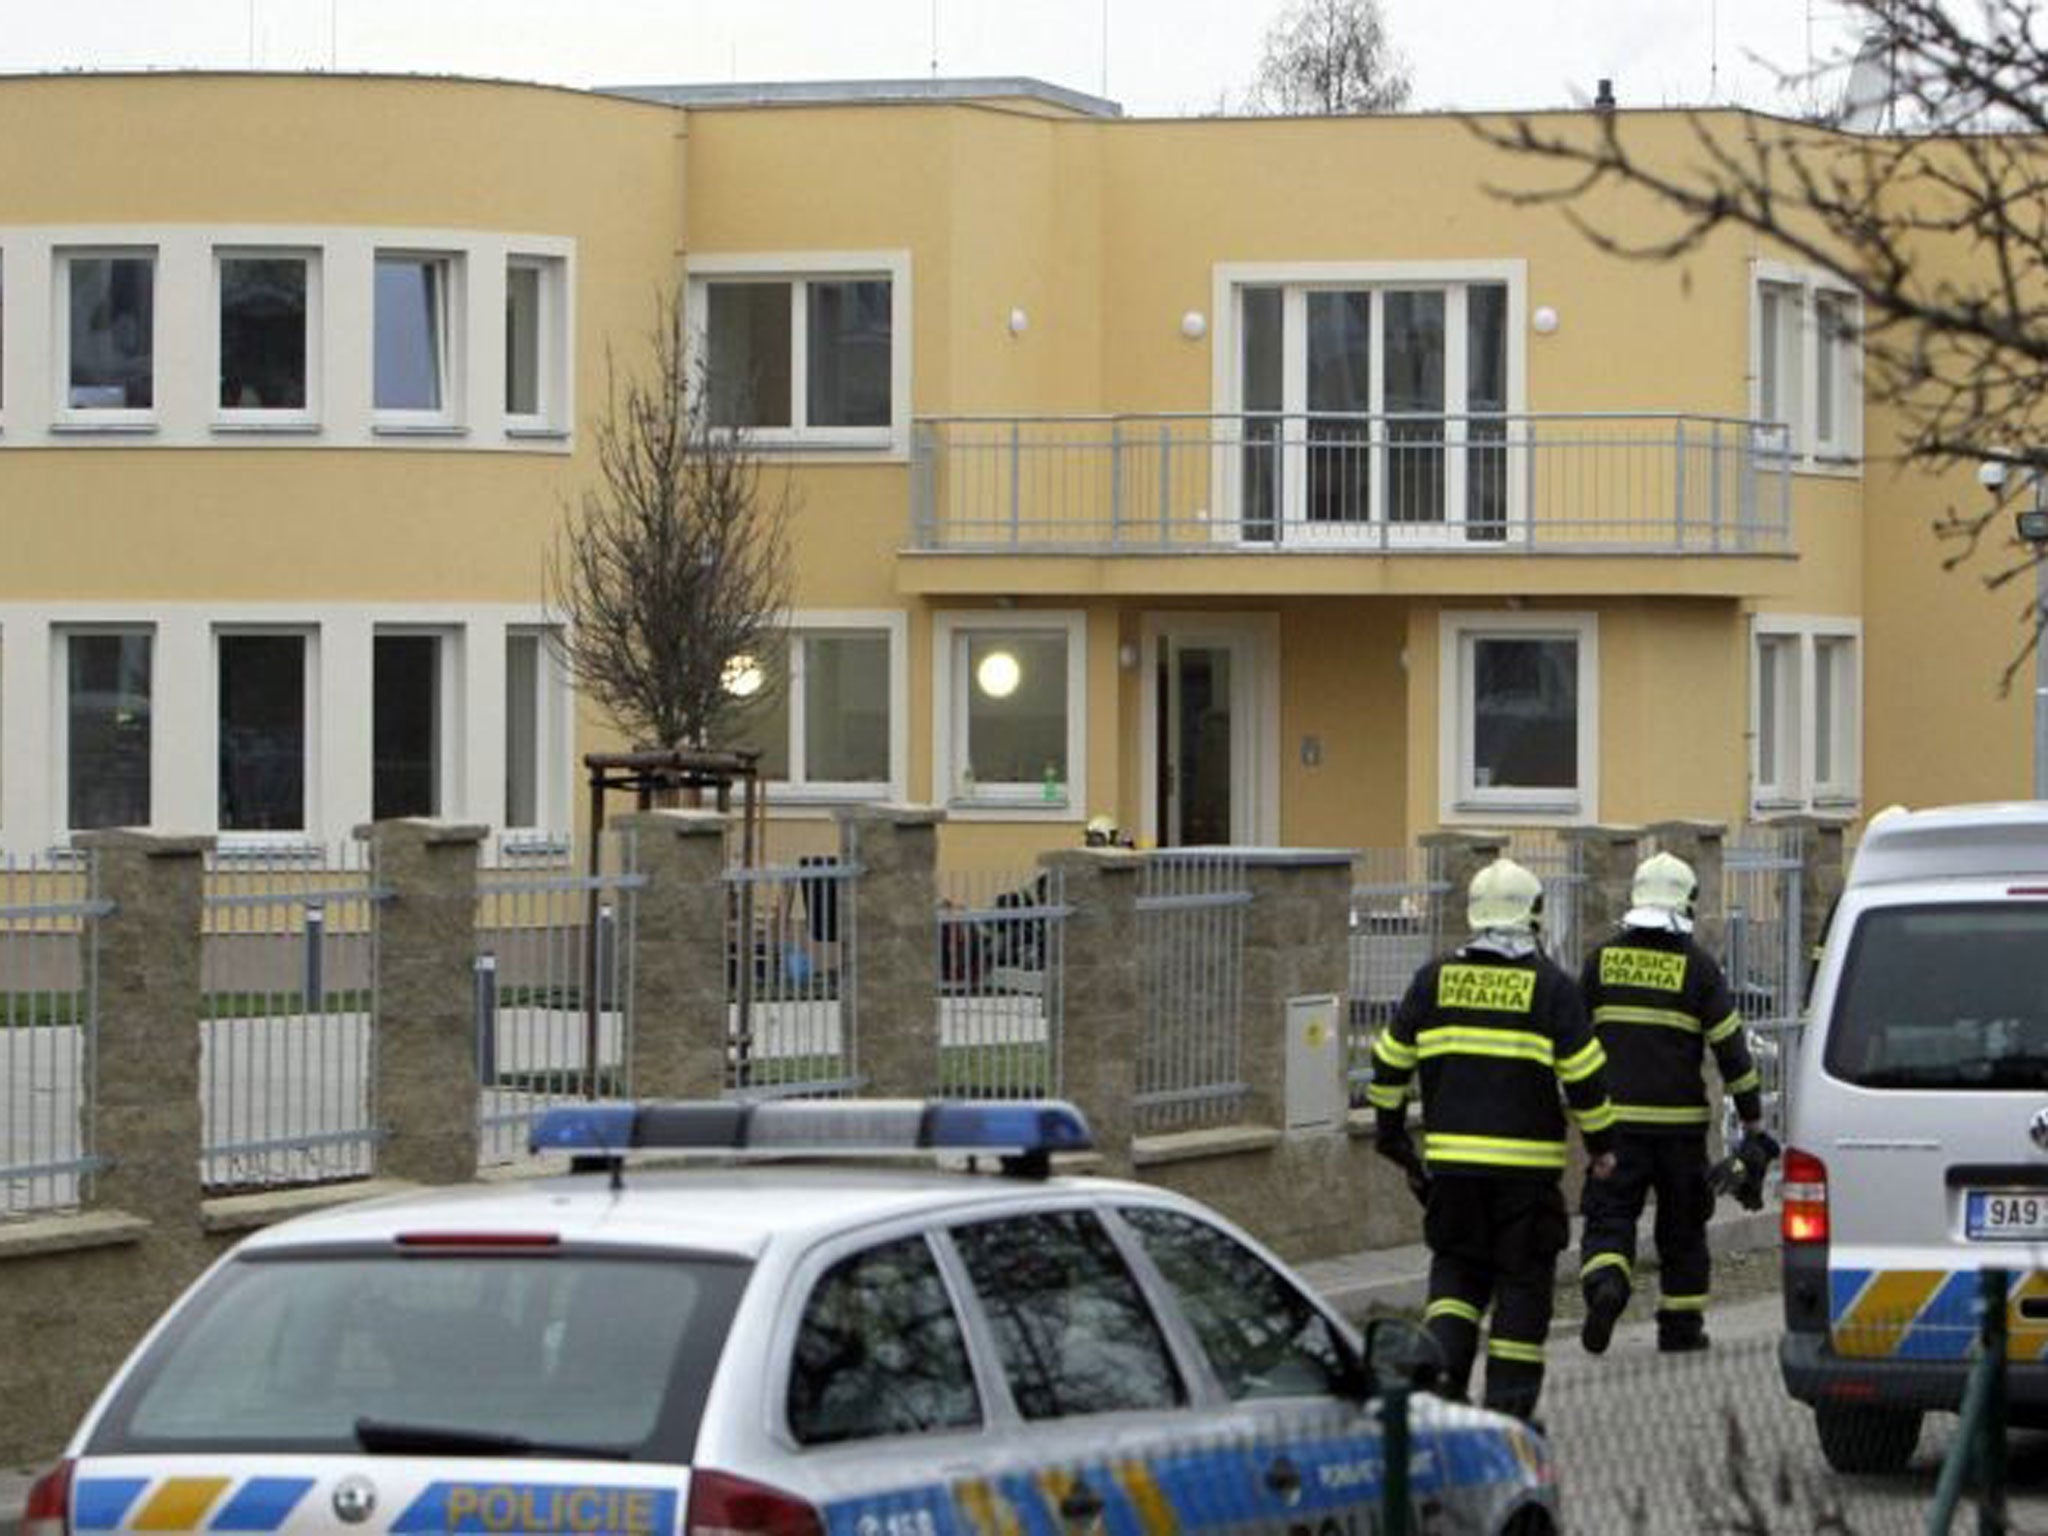 The Prague apartment where the explosion occurred